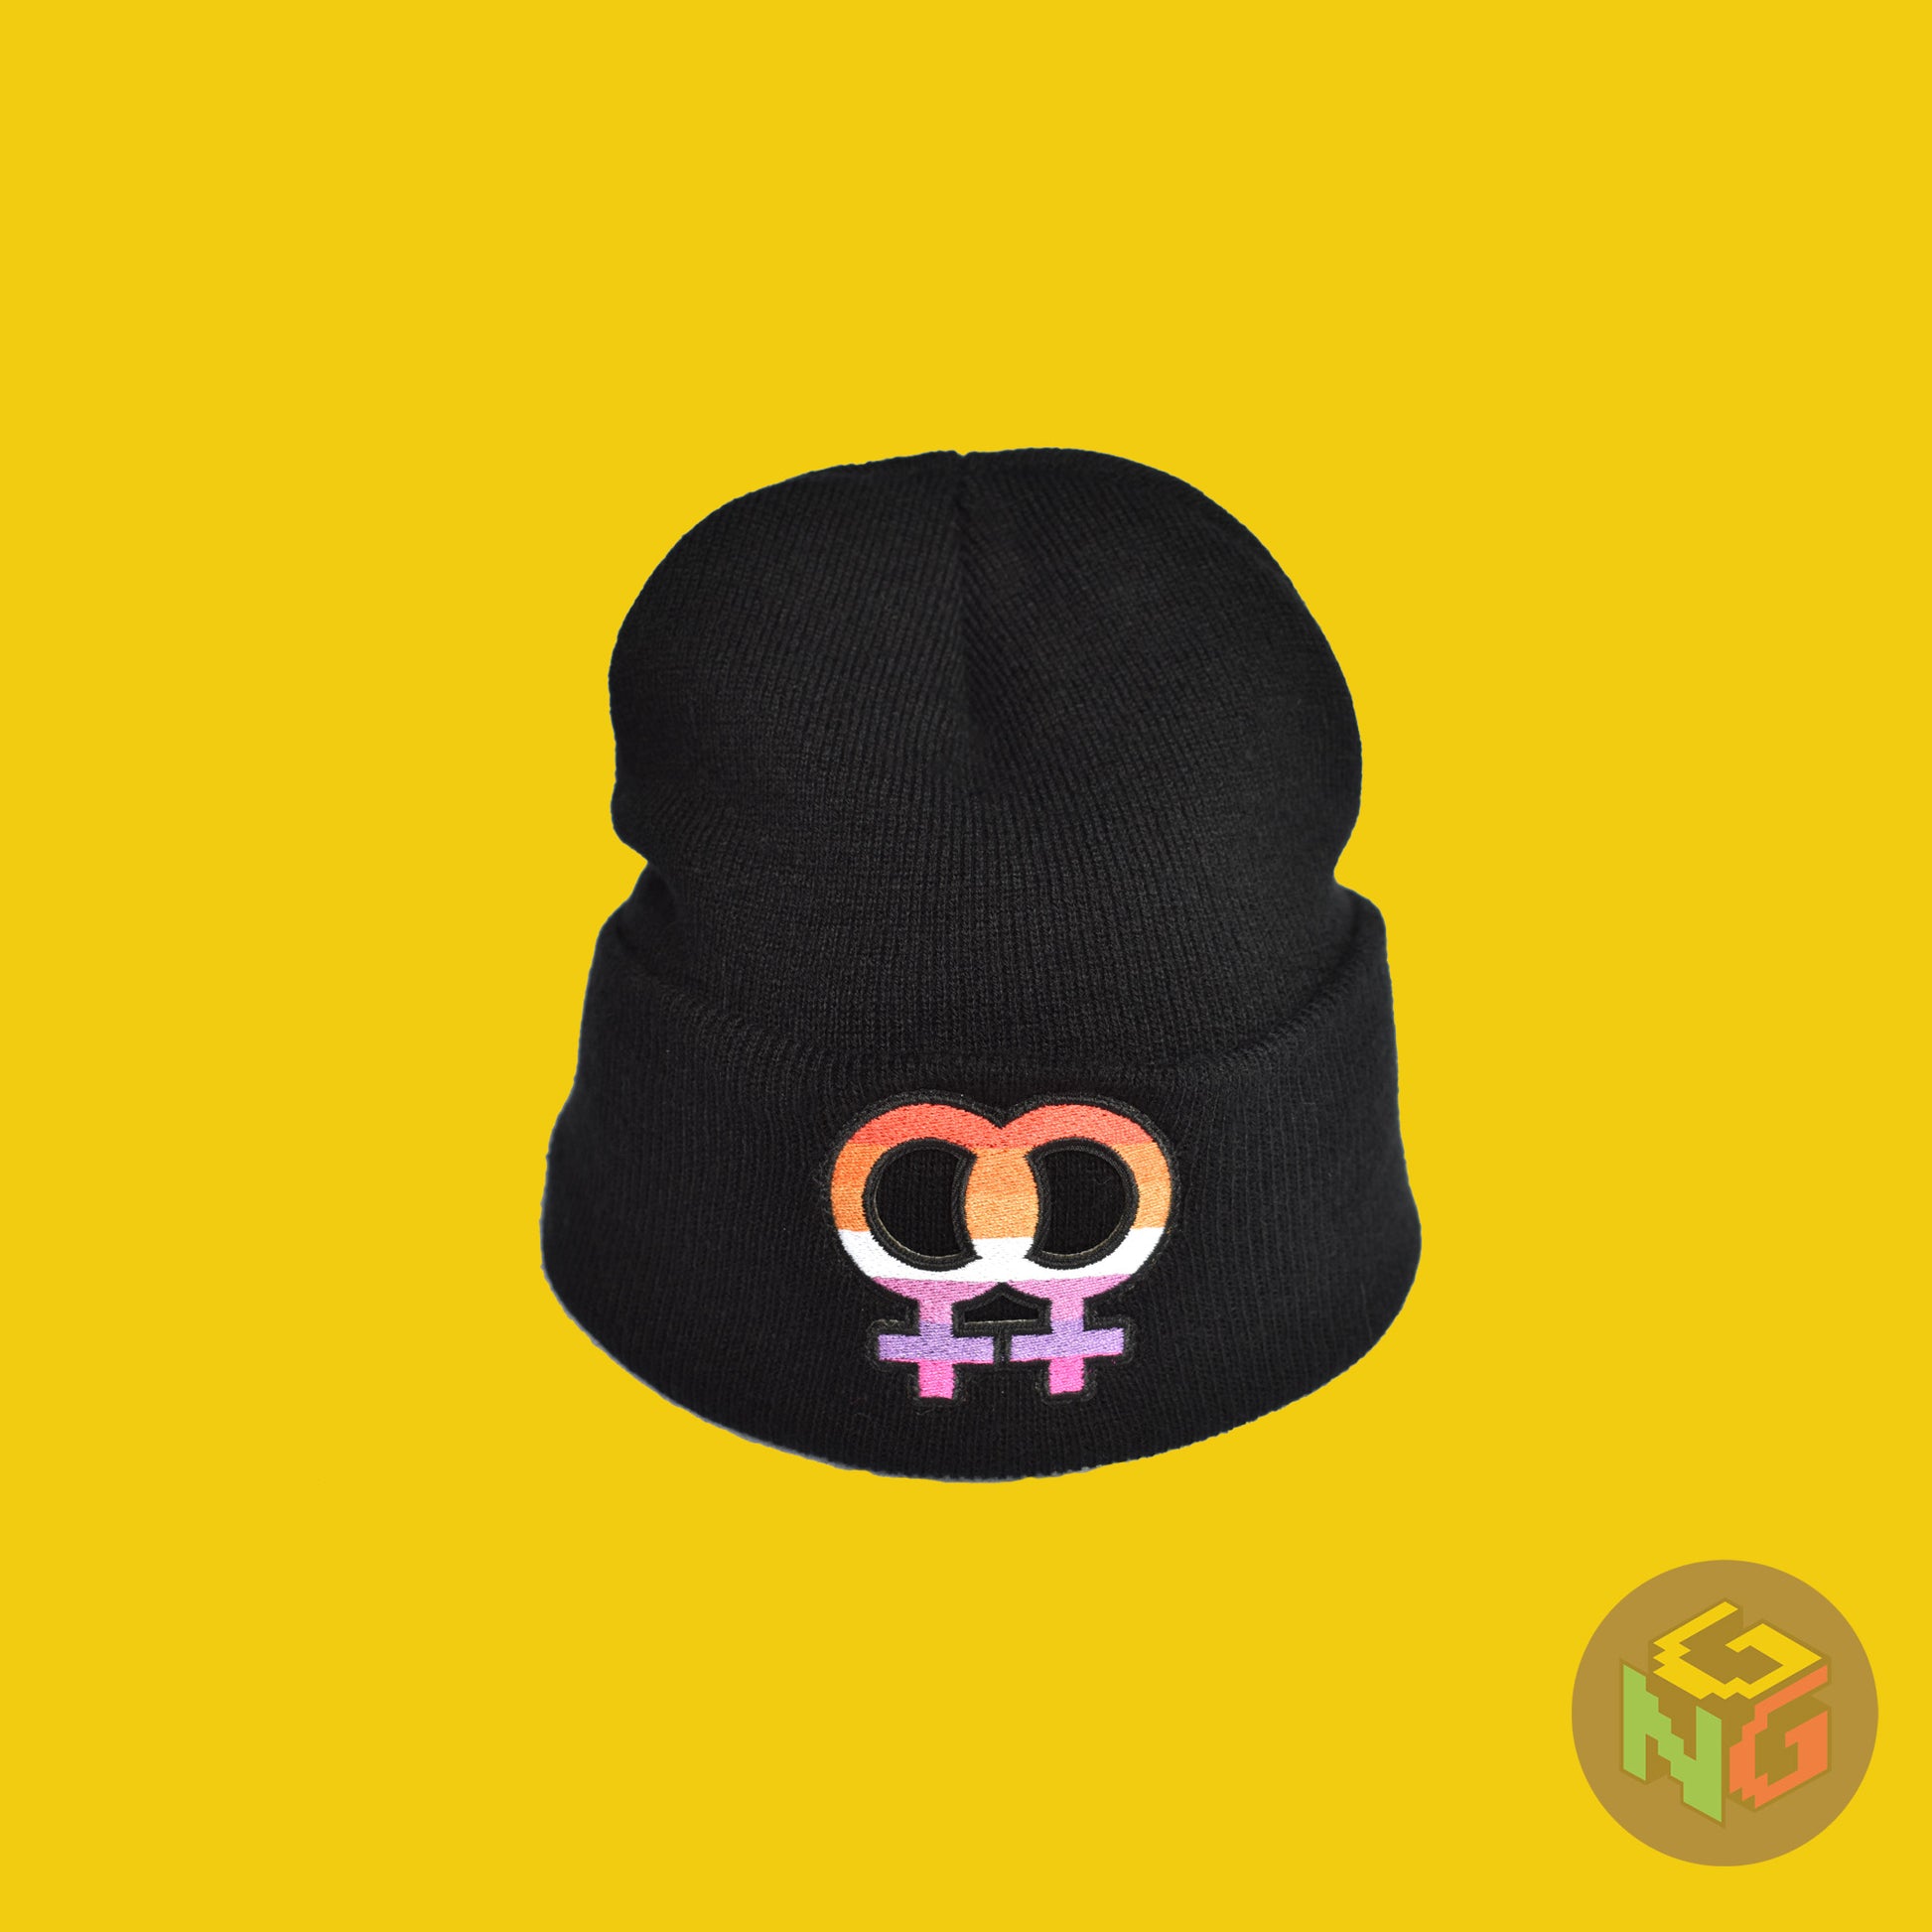 lesbian beanie stretched as if worn front view in front of a yellow background